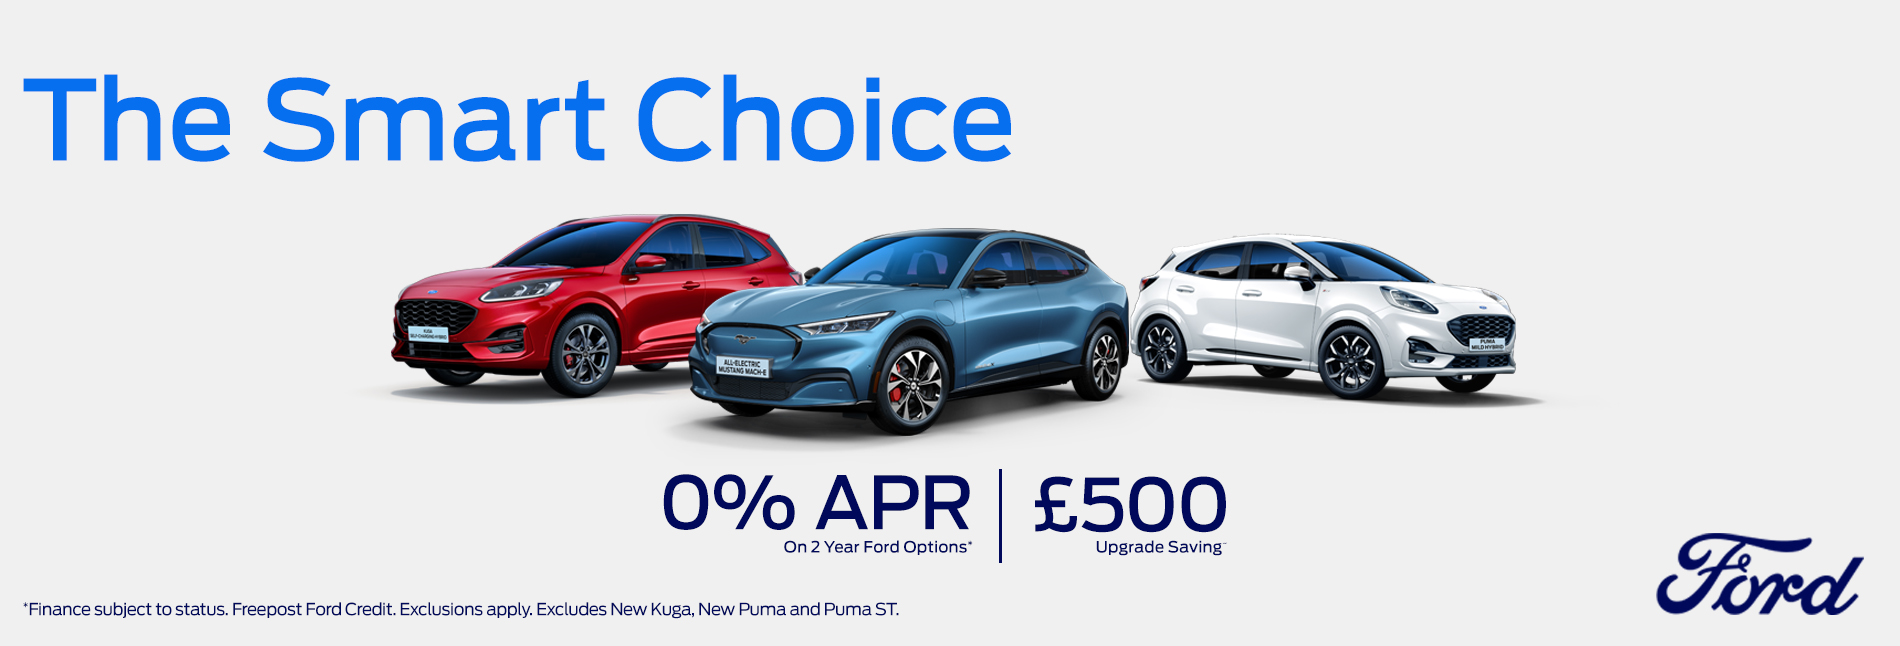 Ford Electric Vehicle Offer